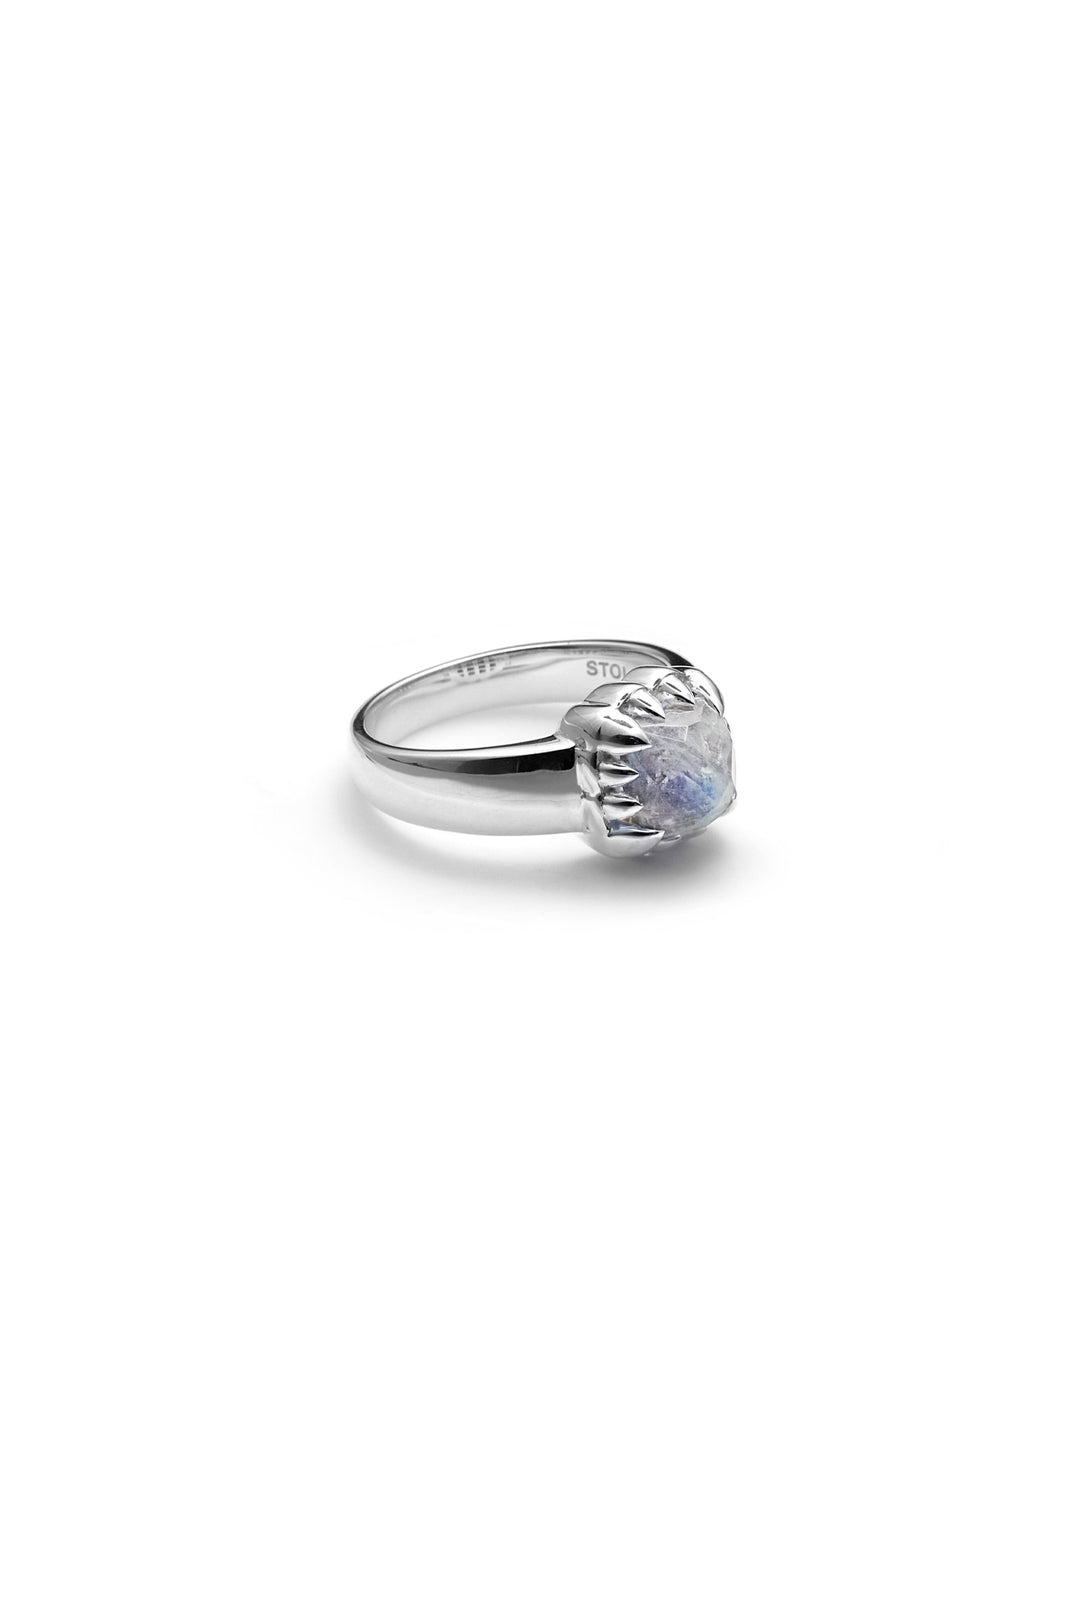 Stolen Girlfriends Club Baby Claw Ring - Moonstone - Size L